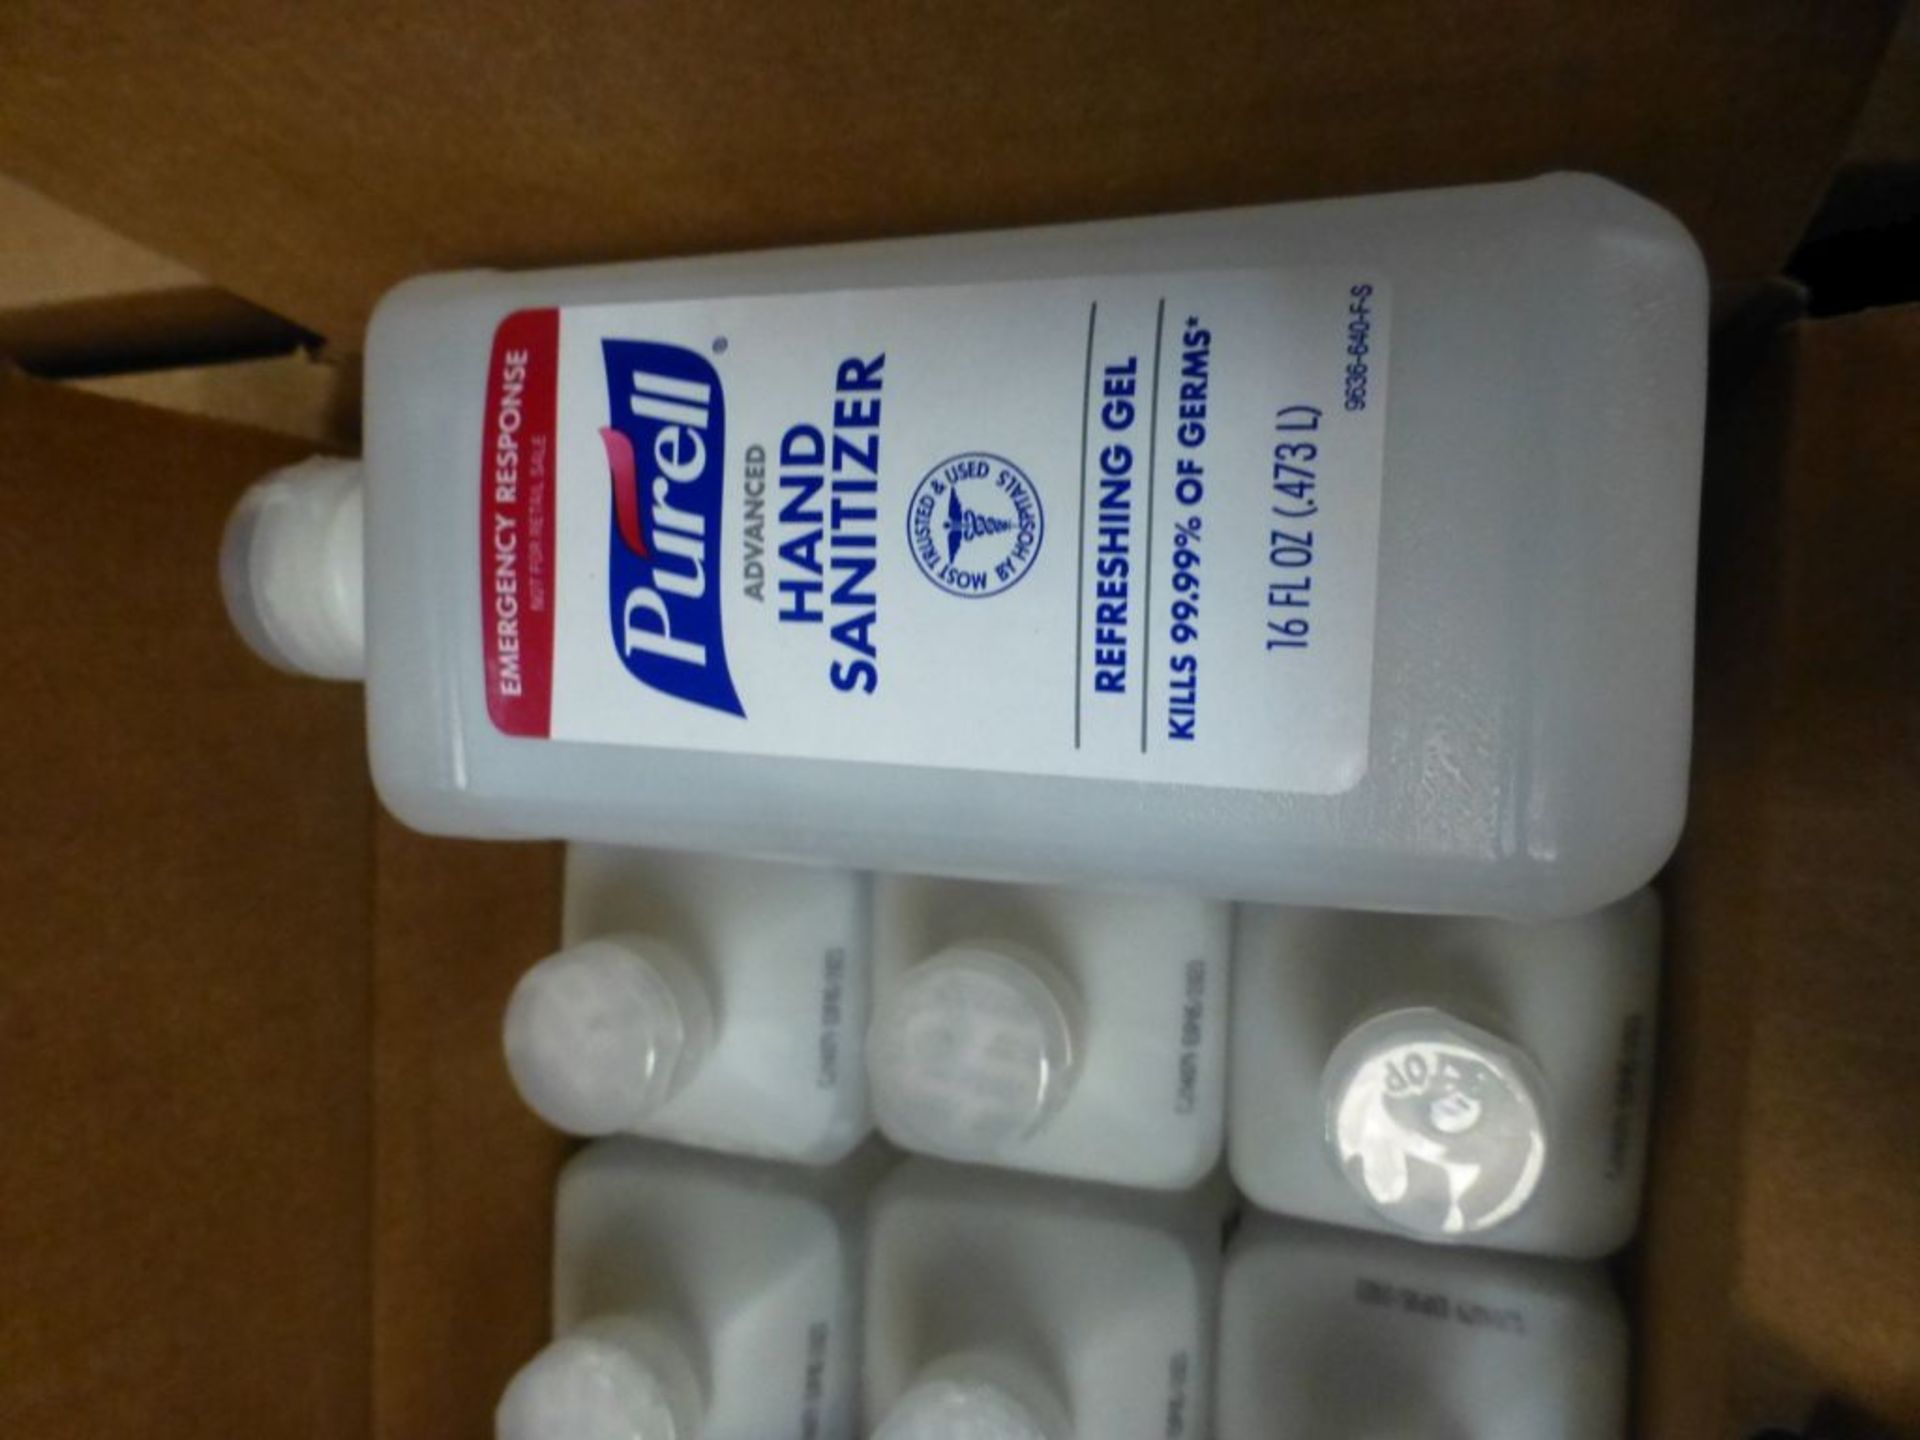 Lot of (1740) 16 oz. Bottles of Purrell Advanced Emergency Response Gel Hand Sanitizer - Part No. - Image 7 of 7